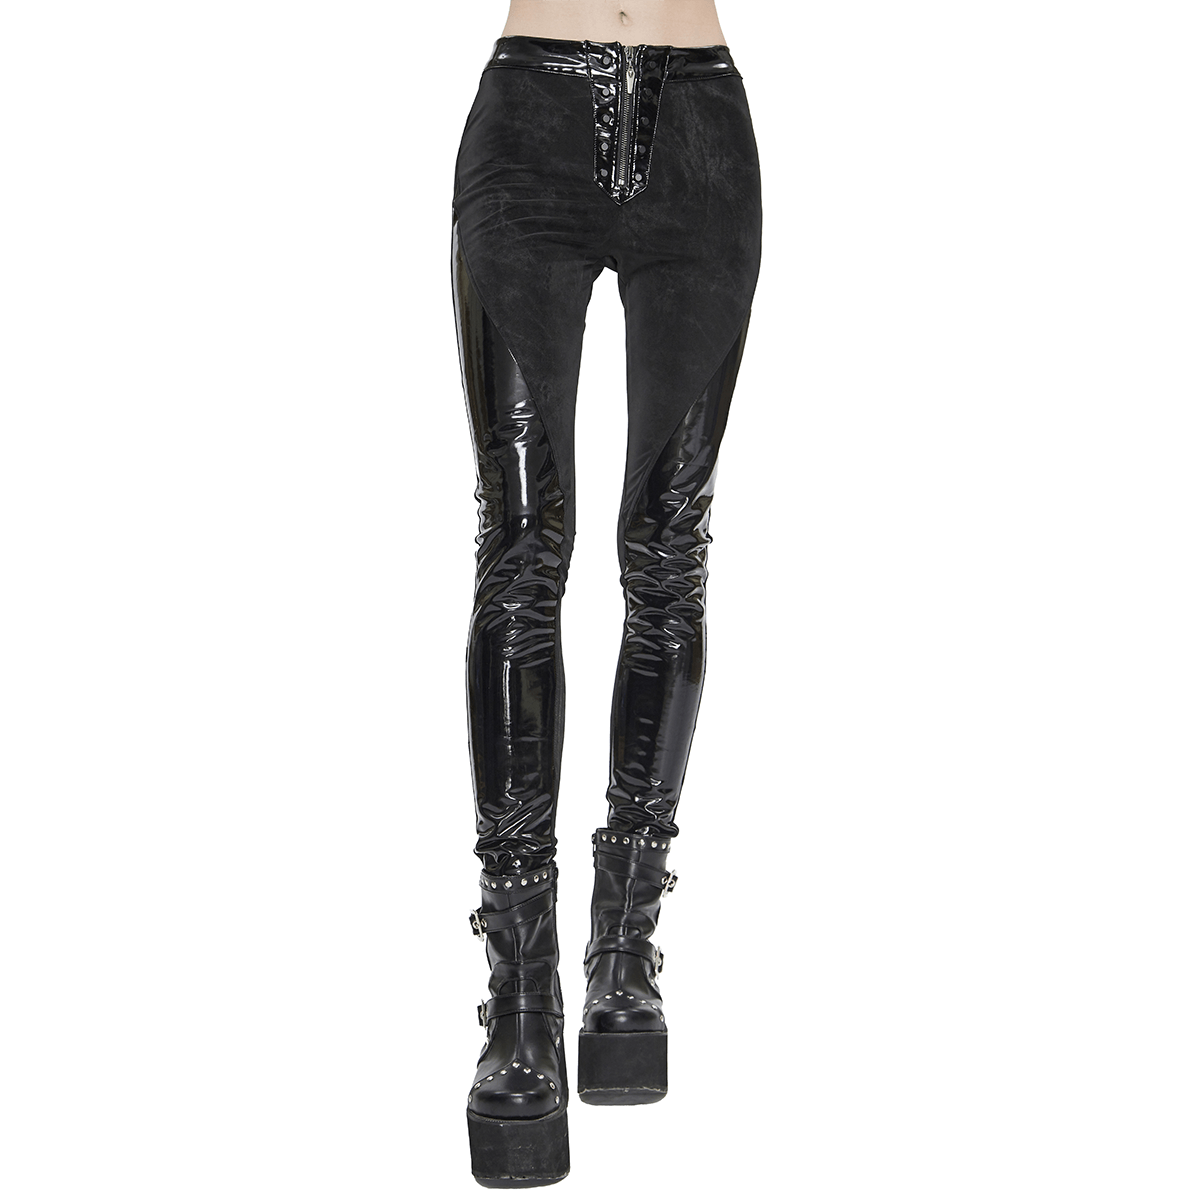 Gothic PU Leather Zipper Trousers / Women's Skinny Pants with Rivets / Alternative Clothing - HARD'N'HEAVY